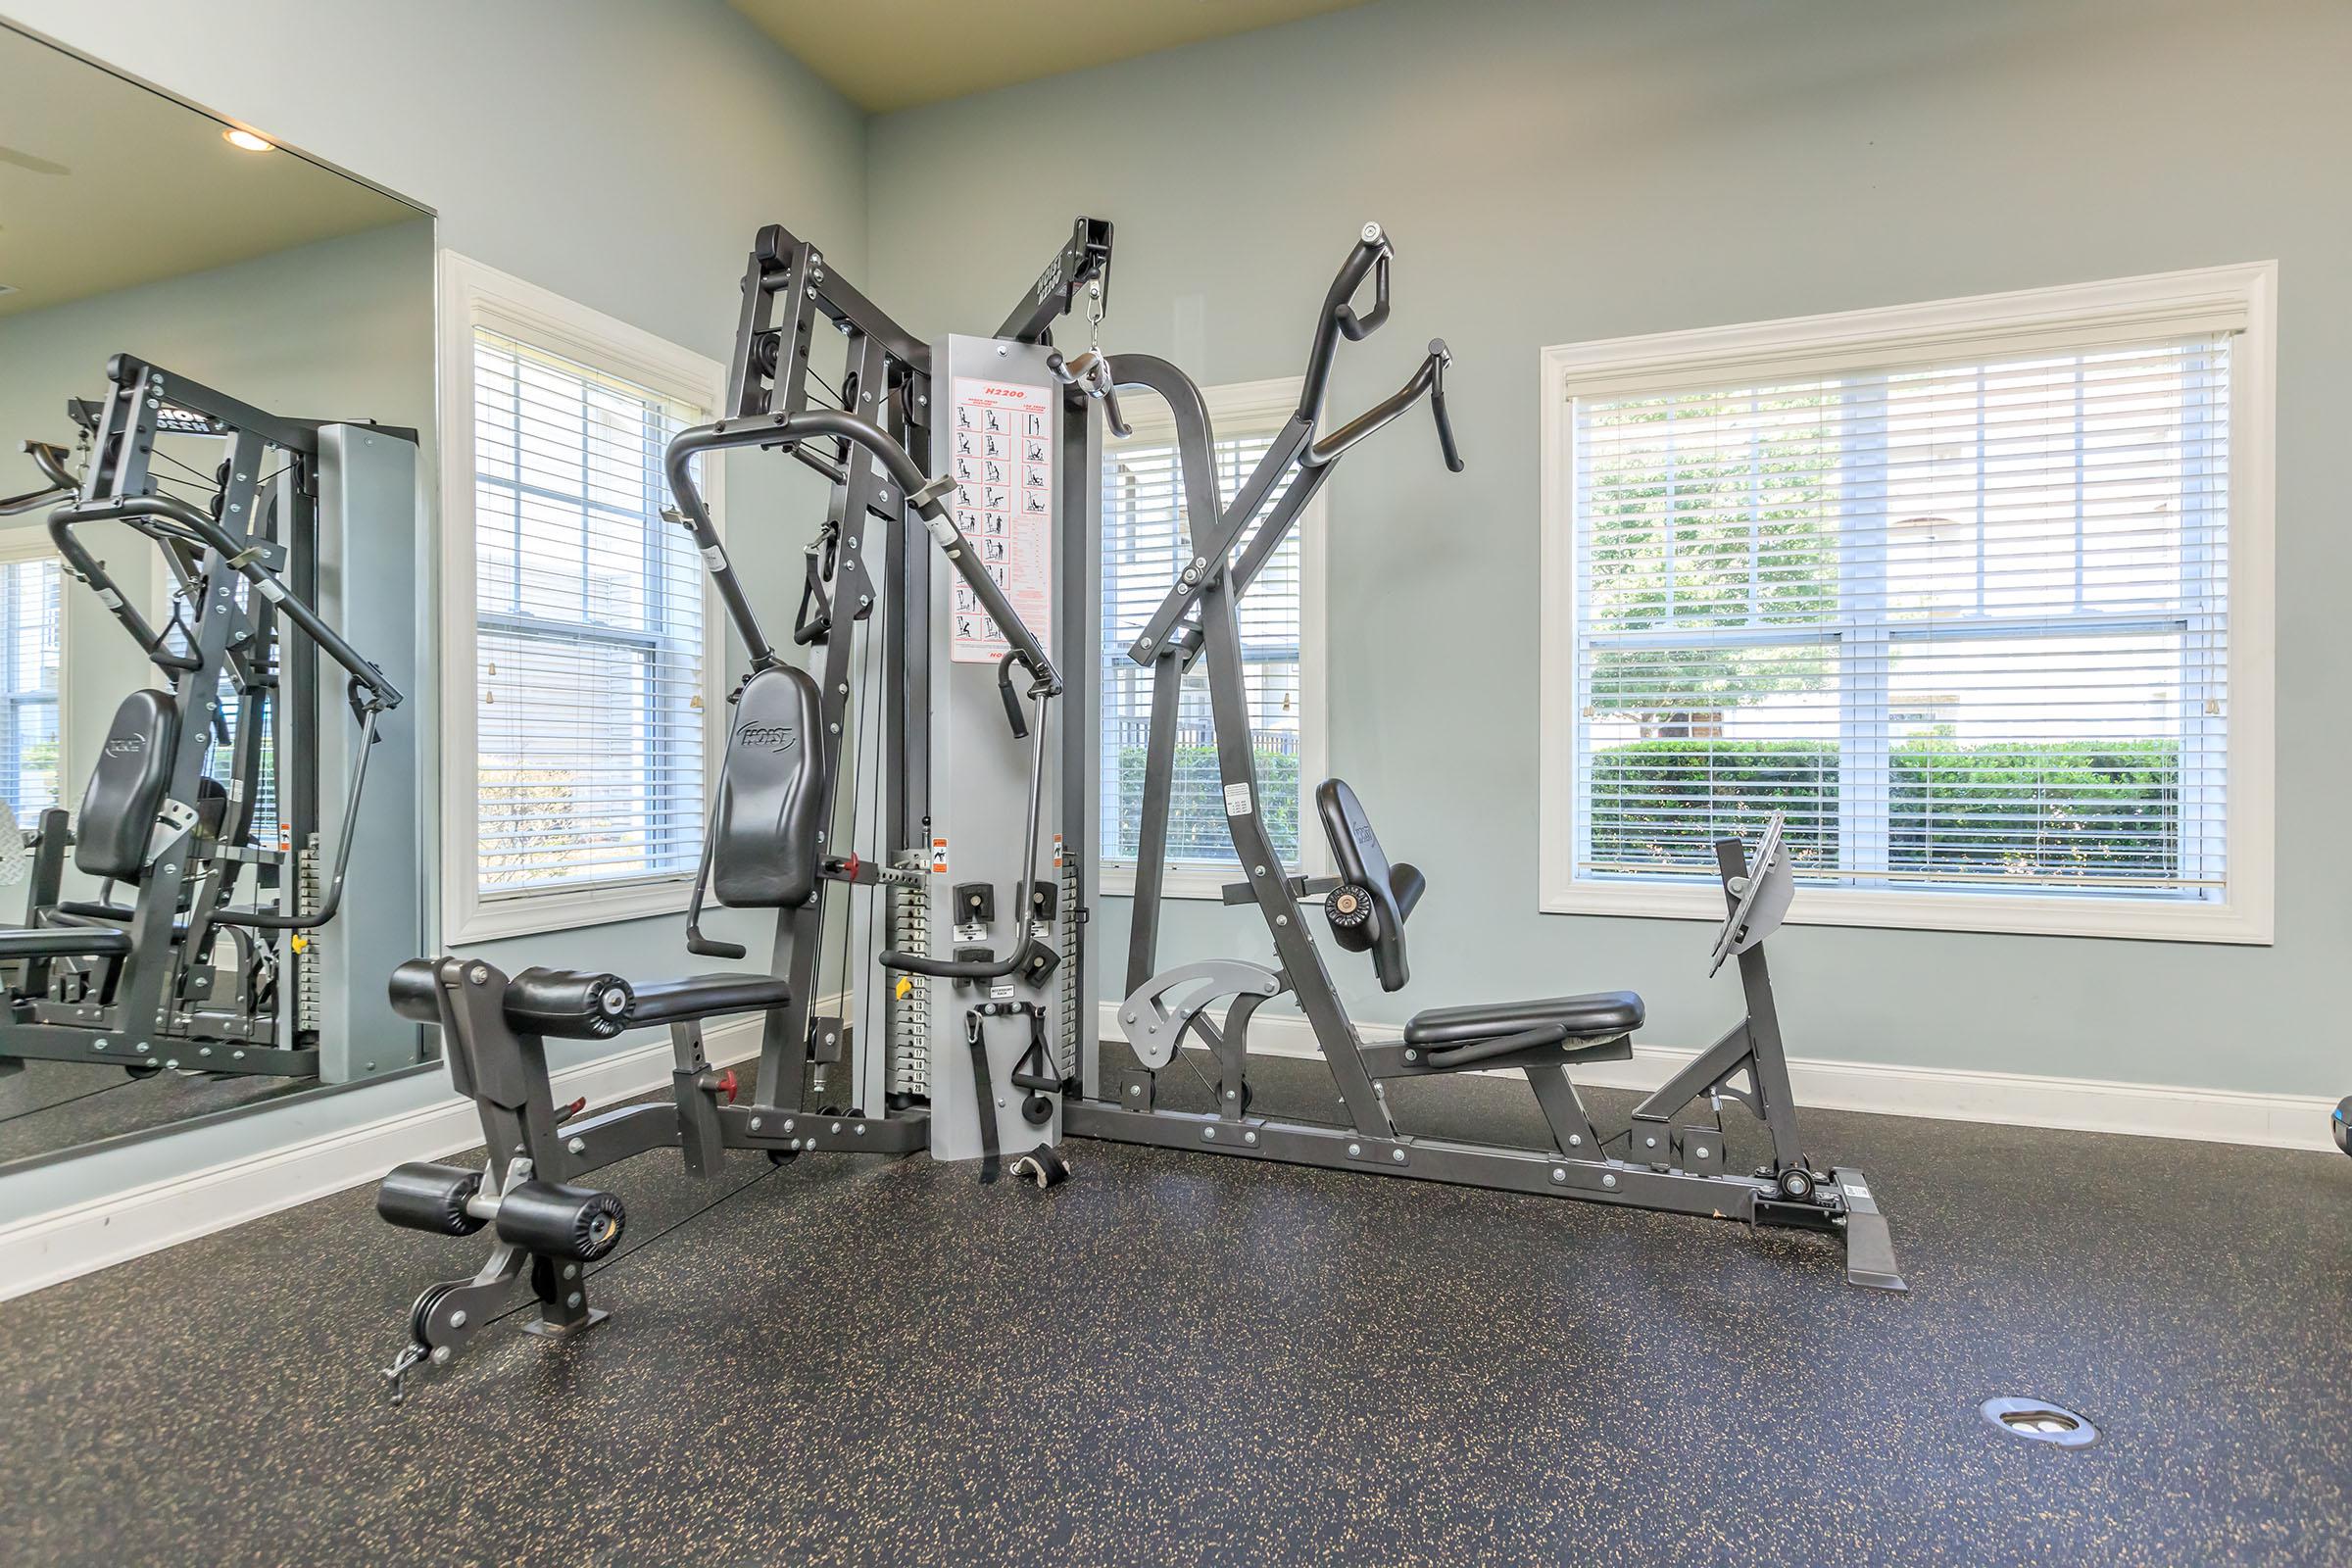 STAY IN SHAPE AT THE 24-7 FITNESS CENTER